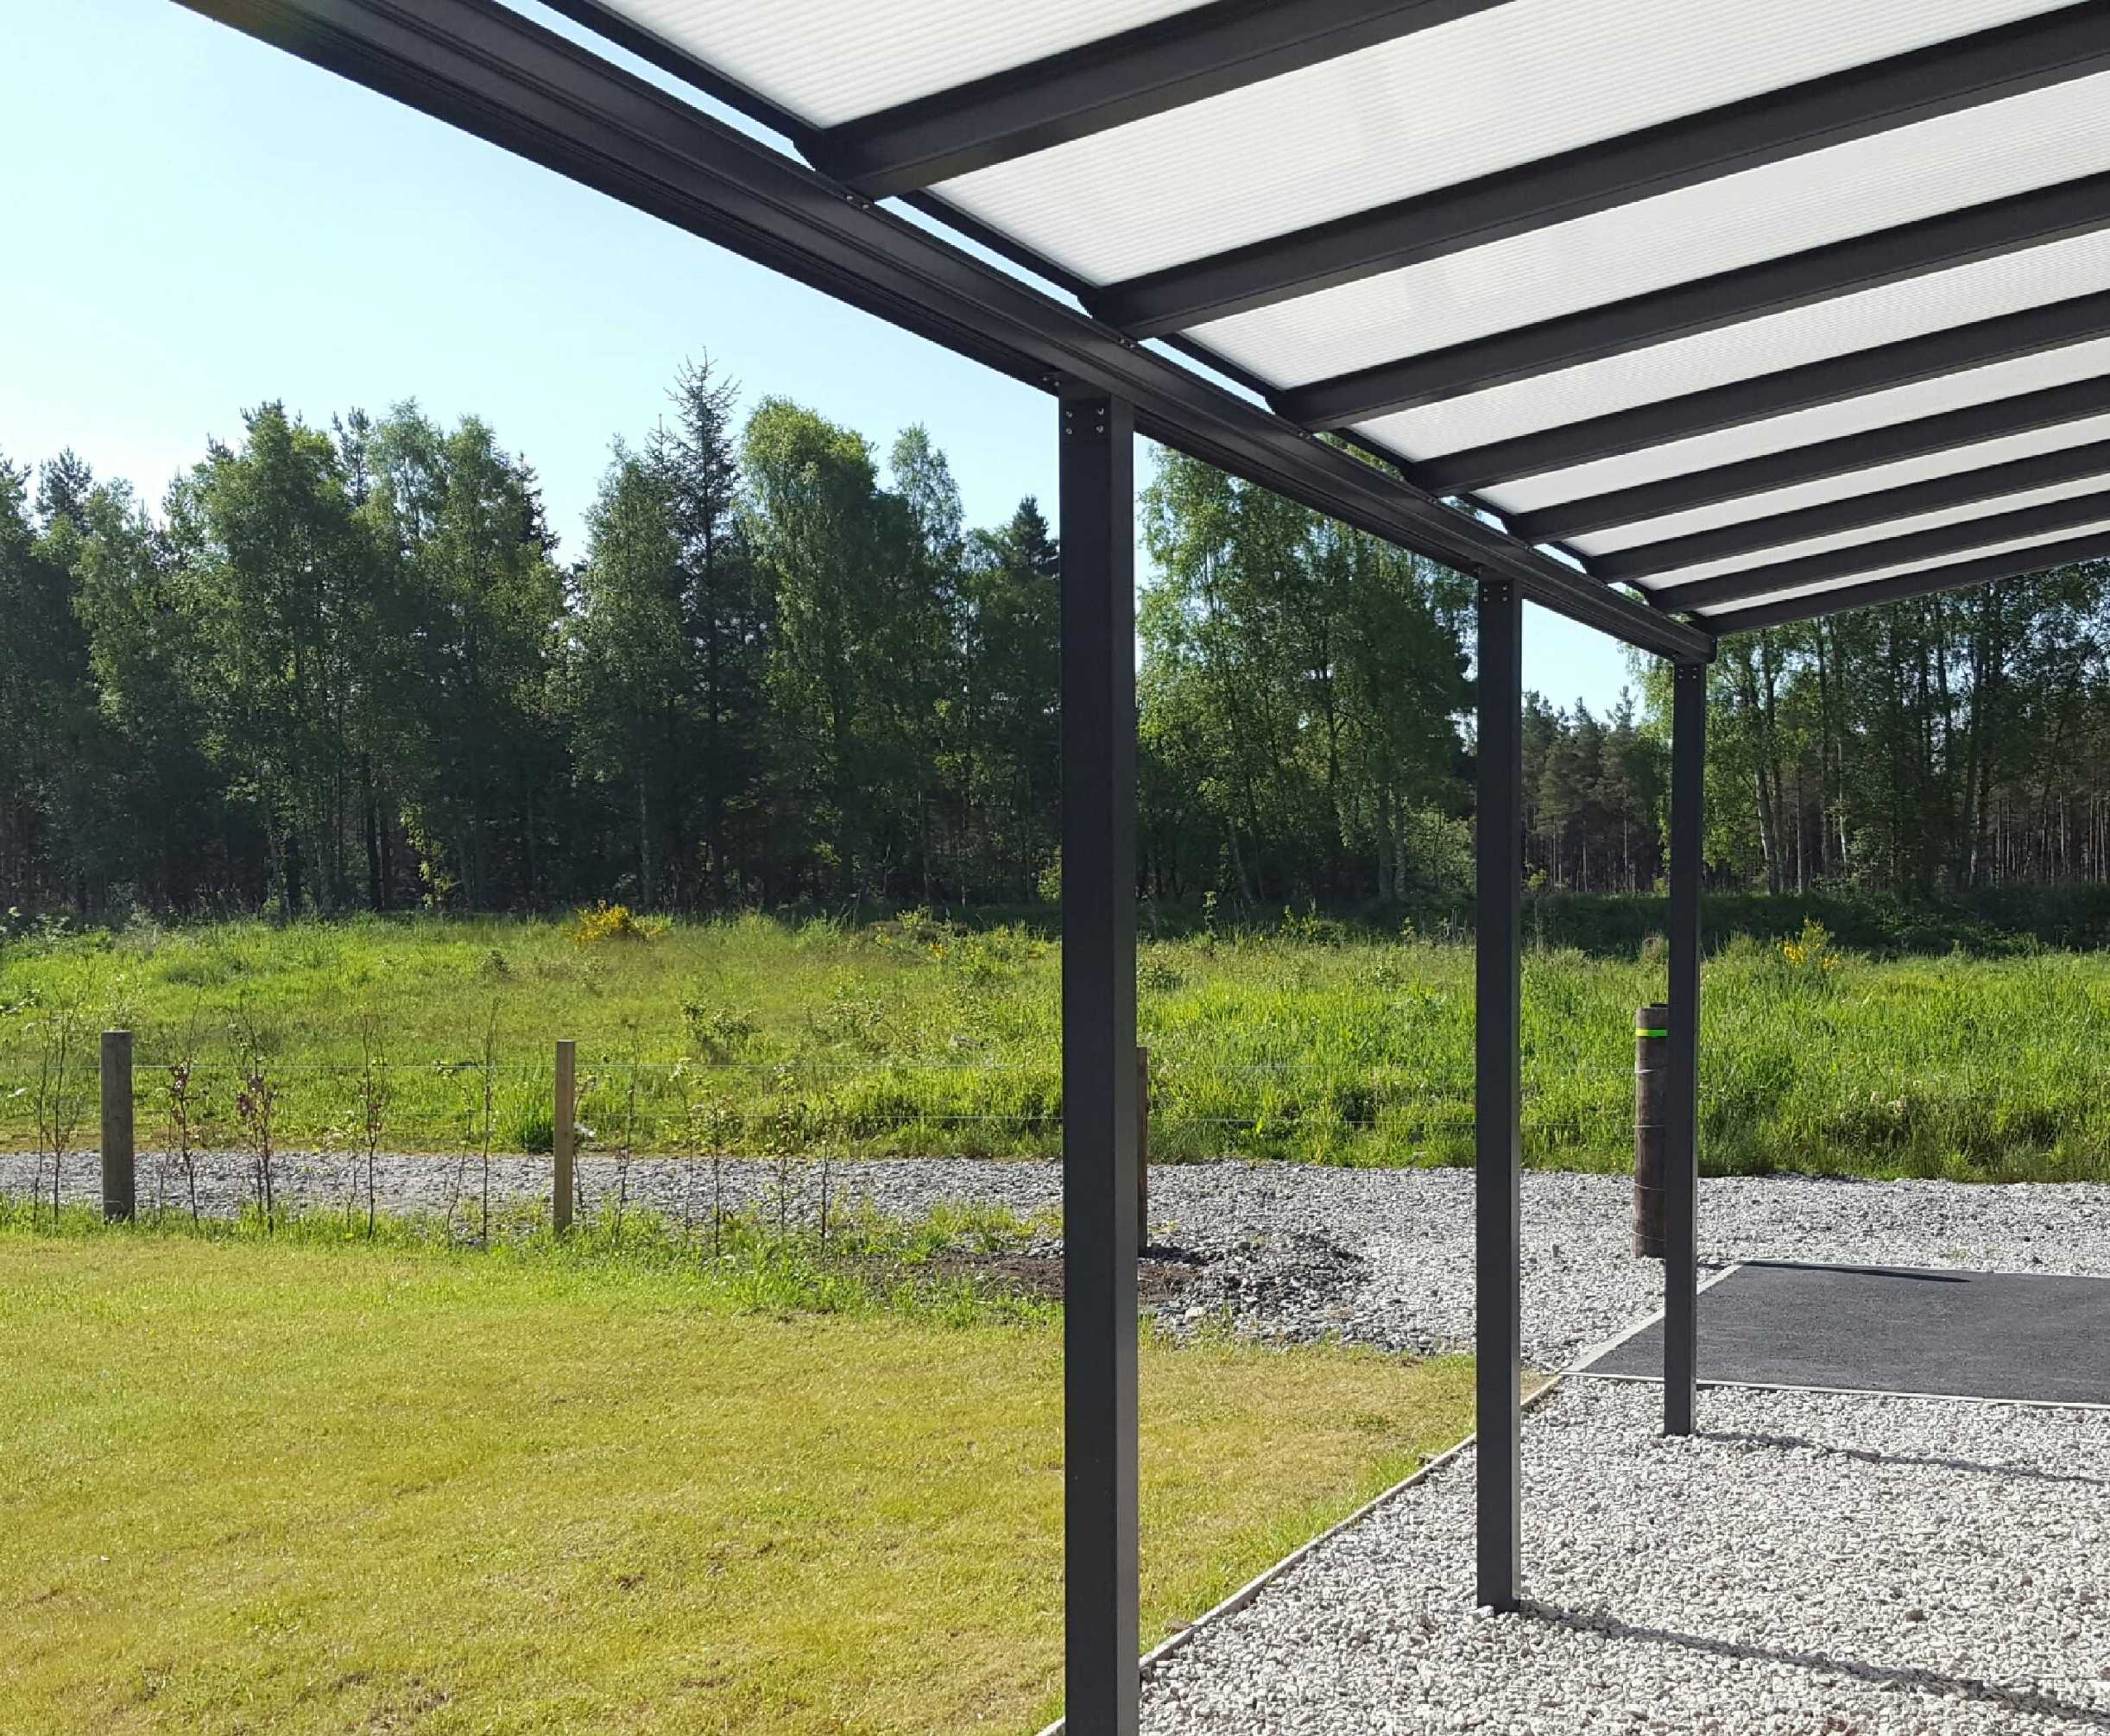 Omega Smart Lean-To Canopy, Anthracite Grey, 6mm Glass Clear Plate Polycarbonate Glazing - 2.8m (W) x 3.0m (P), (2) Supporting Posts